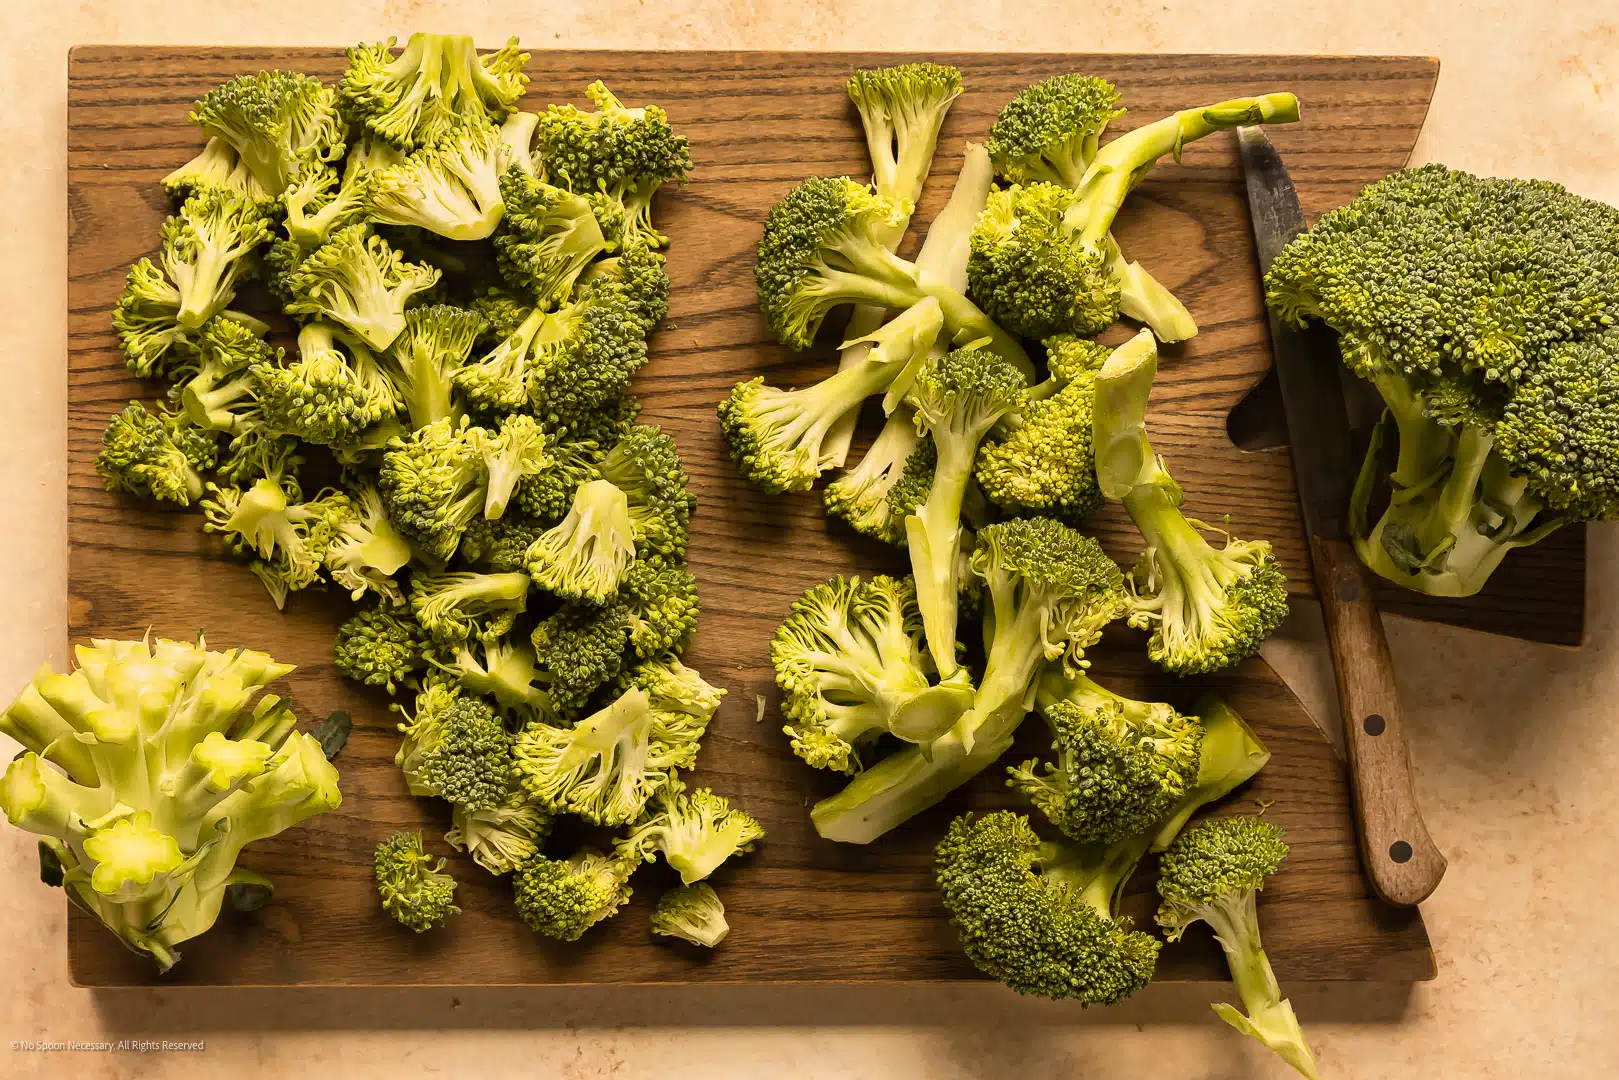 Overhead photo of two piles of cut broccoli florets - one pile with long stems and one pile with short stems.